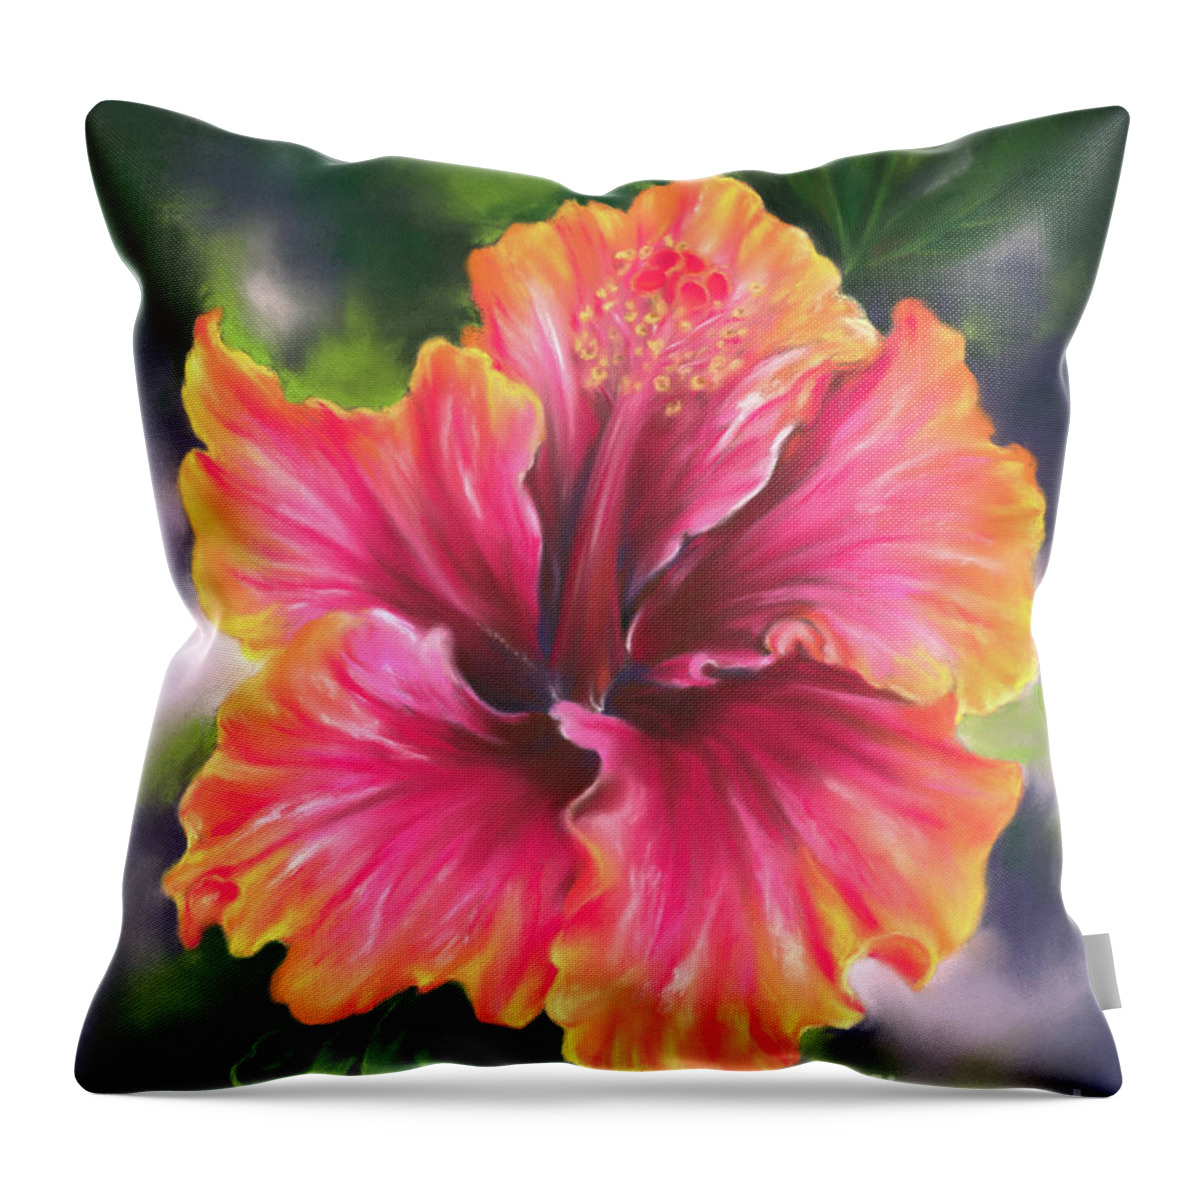 Botanical Throw Pillow featuring the painting Colorful Tropical Hibiscus Flower by MM Anderson